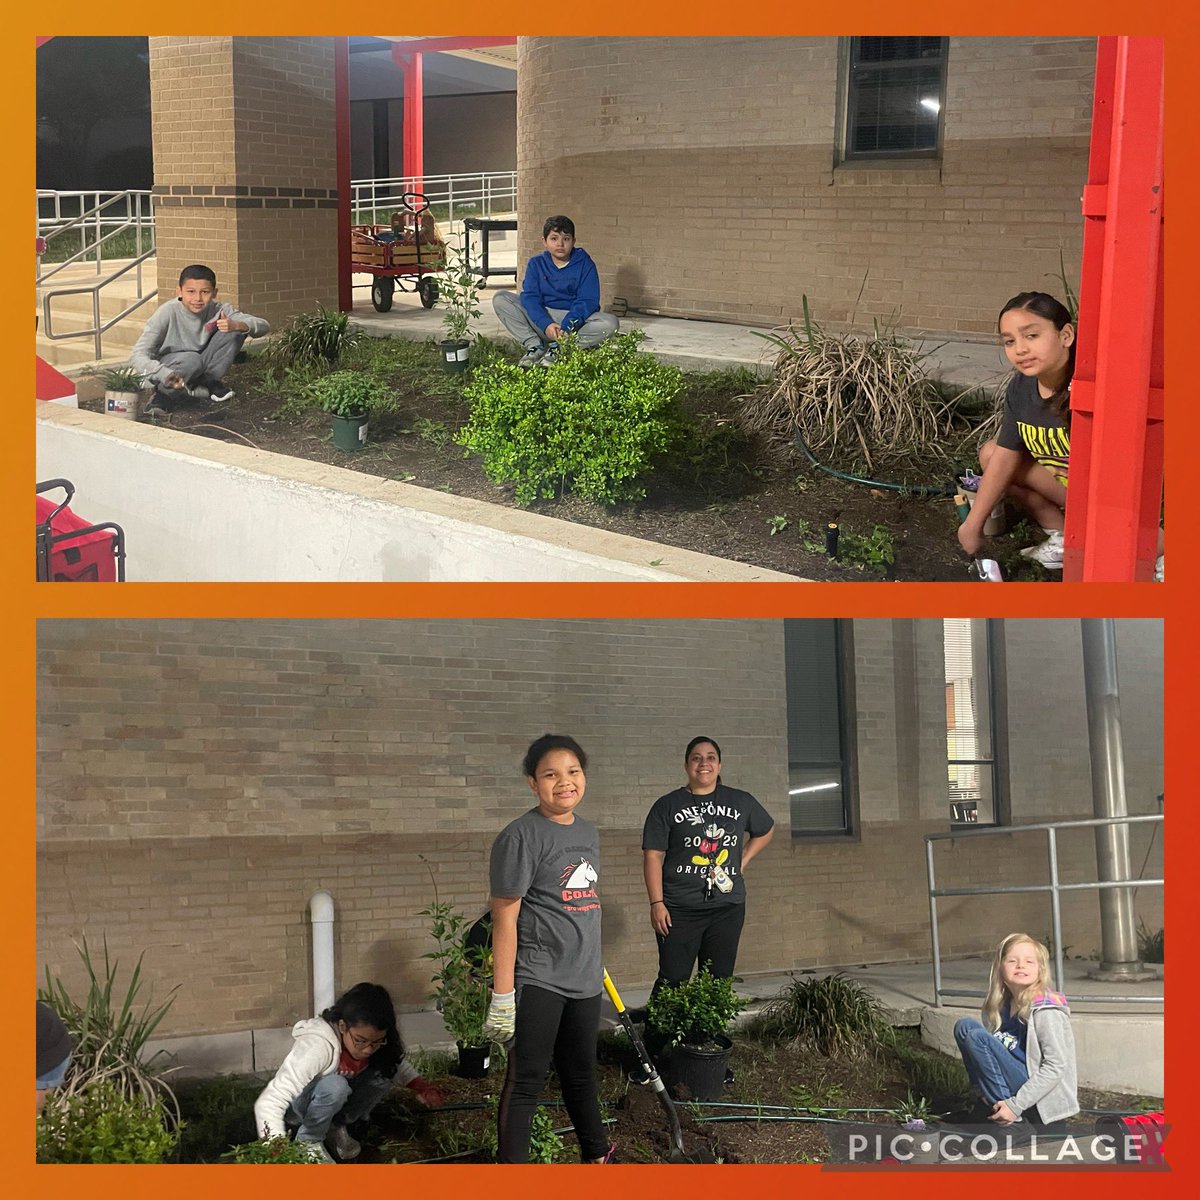 Campus Beautification thanks to our wonderful Cody Gardening Club! Thank you @Michelle_STEM for helping our students grow & bringing beauty to all that you do! #crazyboutcody